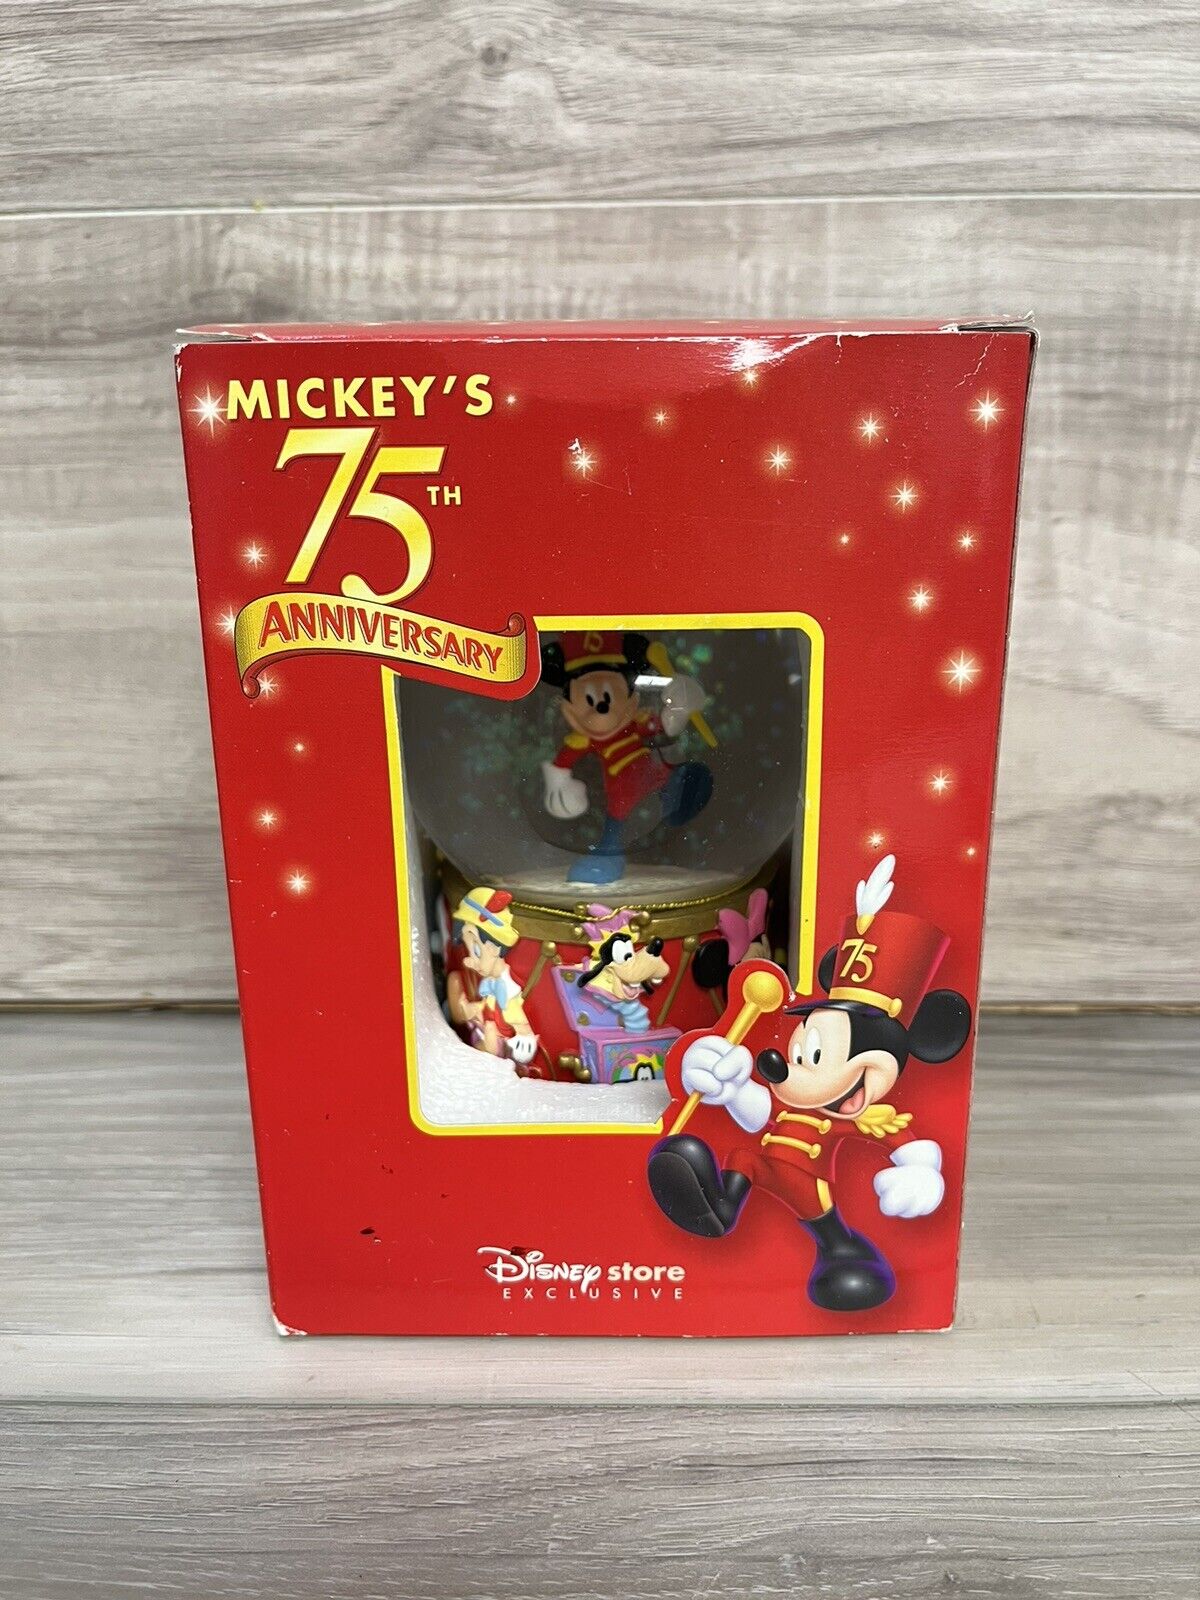 2004 Disney MICKEY’S 75TH ANNIVERSARY Collectible Snow Globe. Special Edition